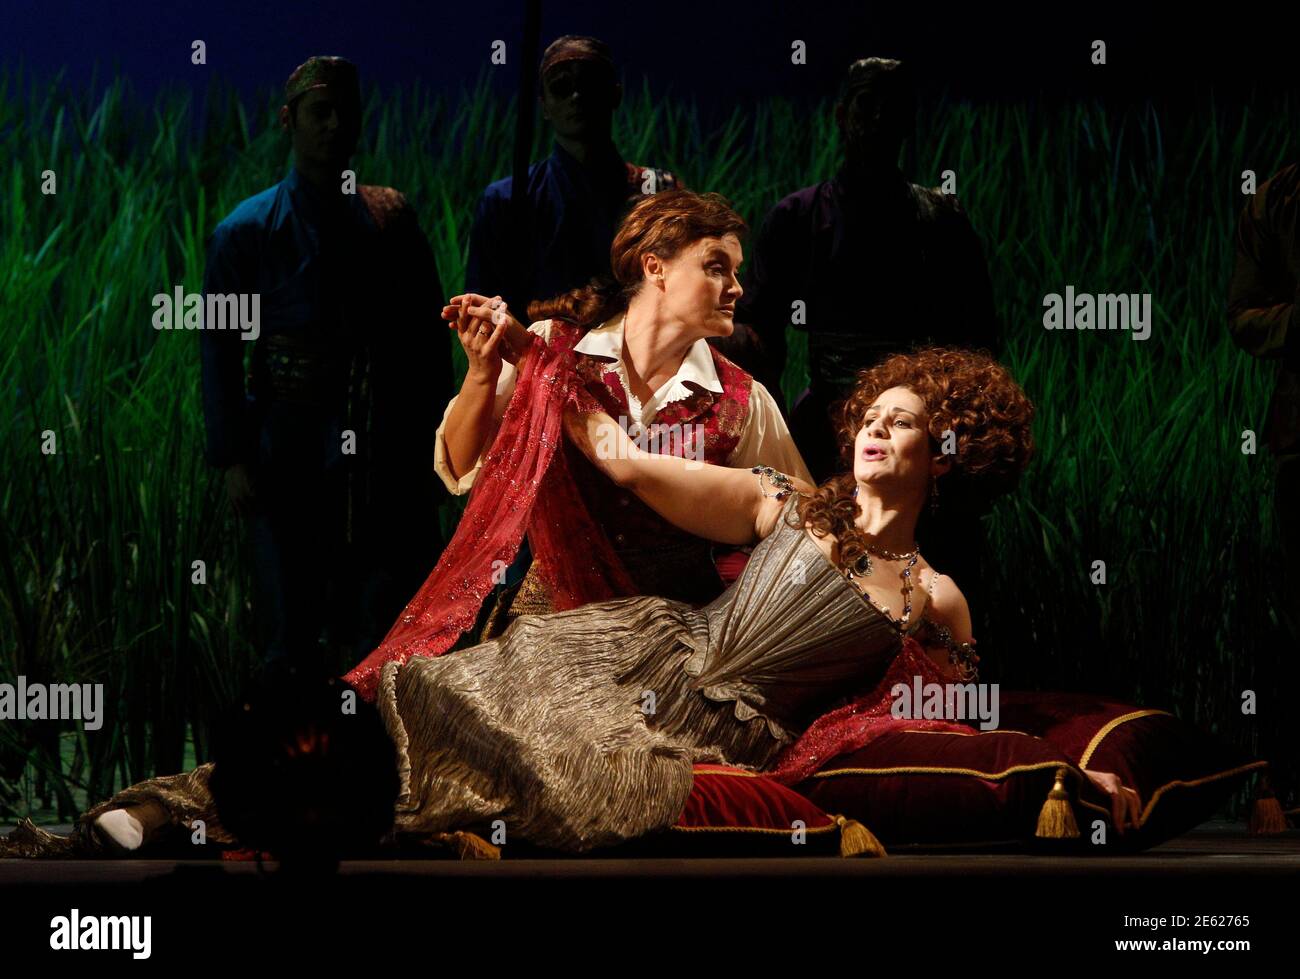 Singers Vesselina Kasarova (L) and Anja Harteros perform on stage as Ruggiero and Alcina during a dress rehearsal of George Frideric Handel's opera 'Alcina' at the state opera house in Vienna November 10, 2010. The opera is conducted by Marc Minkowski and will premiere on November 14.  REUTERS/Herwig Prammer (AUSTRIA - Tags: ENTERTAINMENT) Stock Photo